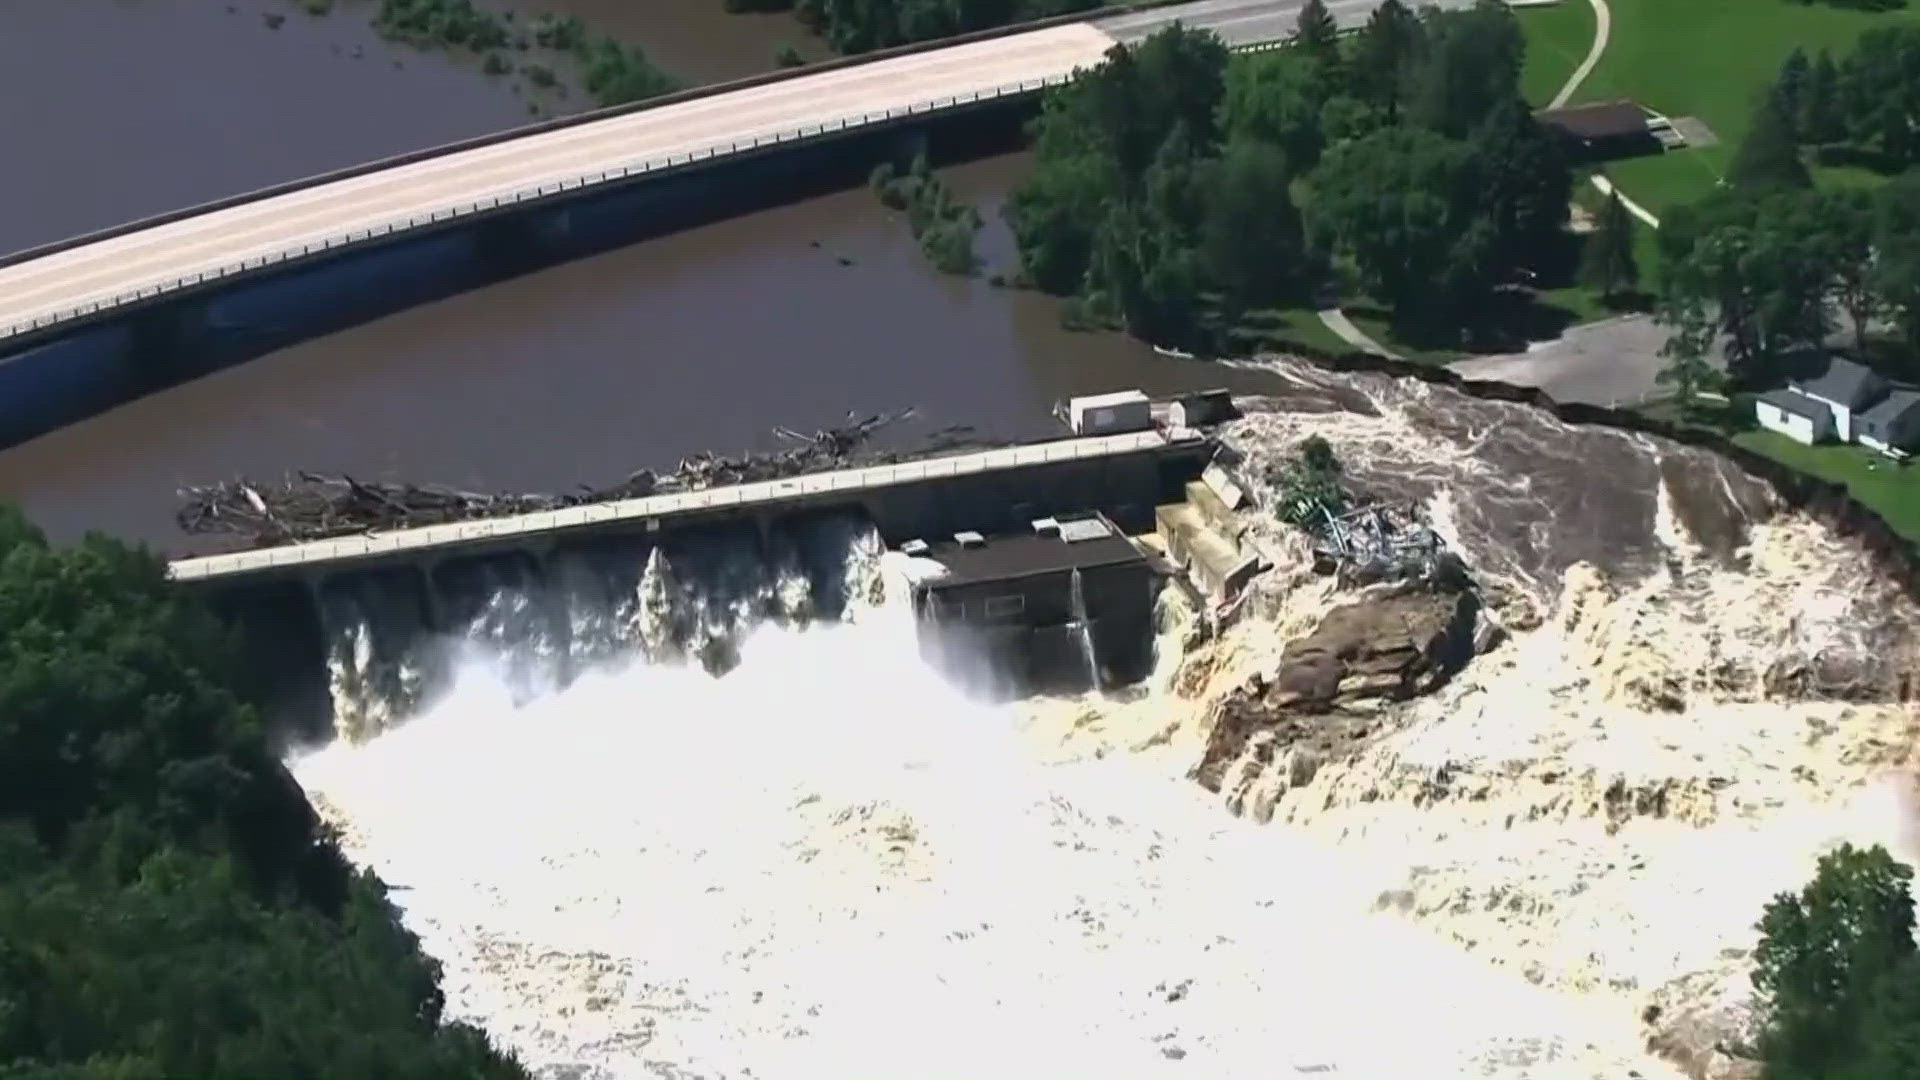 An outbuilding in Minnesota can be seen being swept away as a 'partial failure' at Rapidan Dam